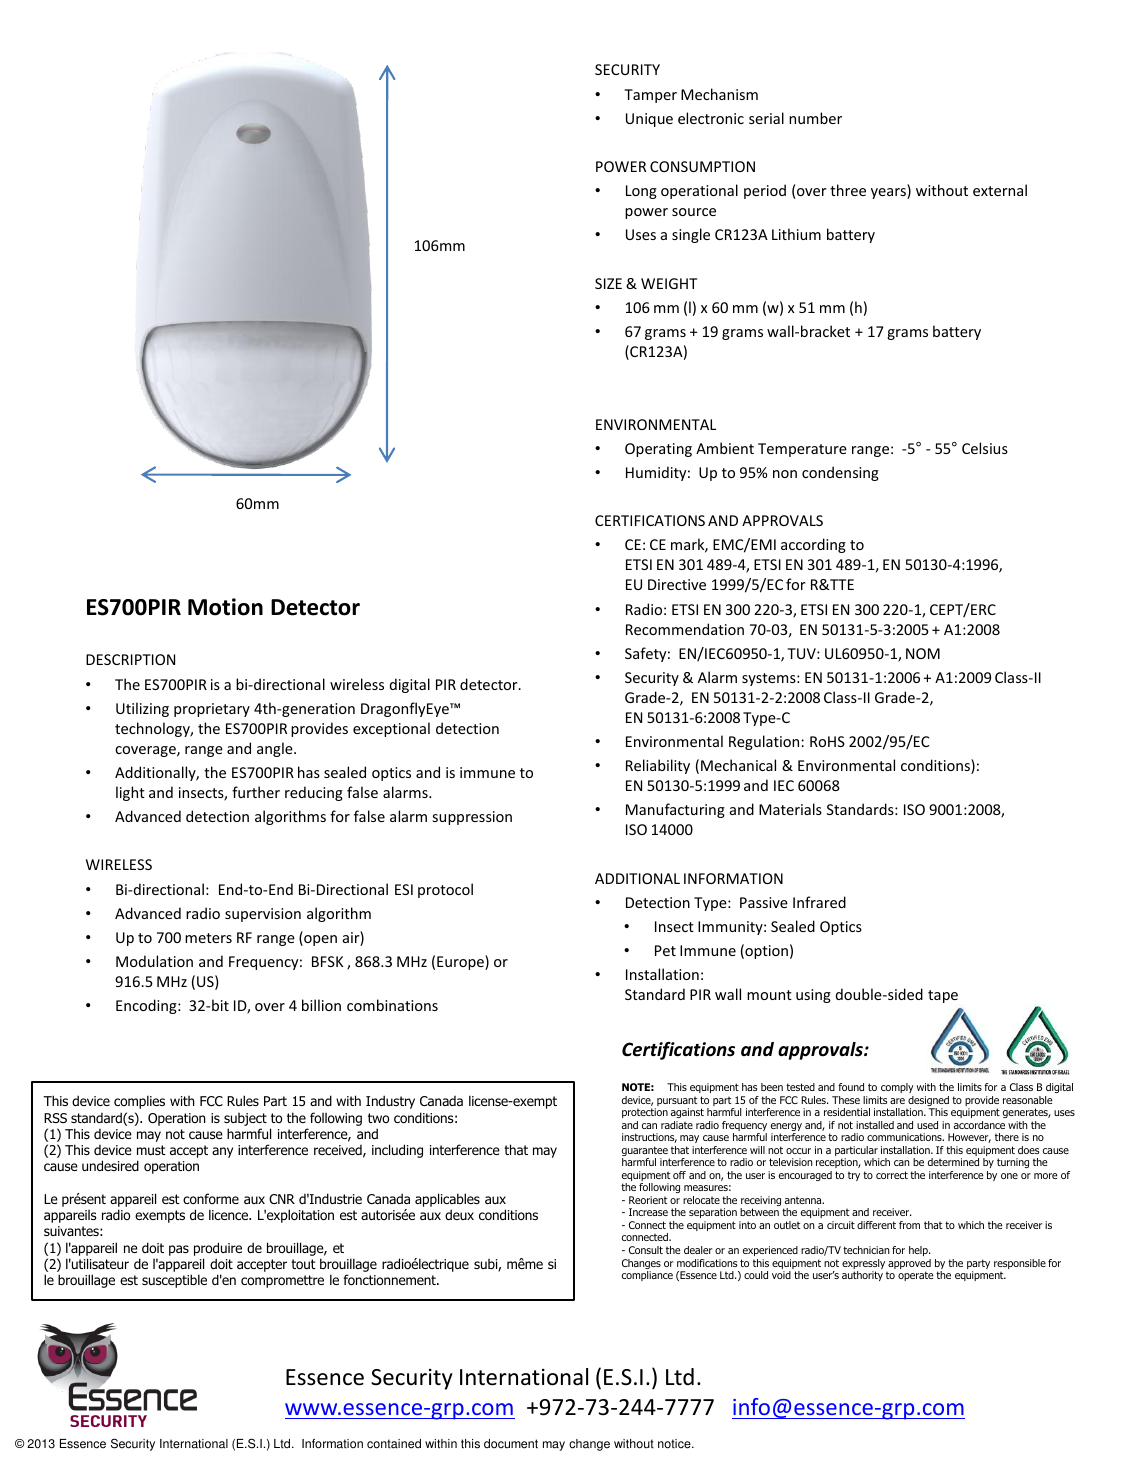                       ES700PIR Motion Detector  DESCRIPTION •The ES700PIR is a bi-directional wireless digital PIR detector.  •Utilizing proprietary 4th-generation DragonflyEye™ technology, the ES700PIR provides exceptional detection coverage, range and angle.  •Additionally, the ES700PIR has sealed optics and is immune to light and insects, further reducing false alarms. •Advanced detection algorithms for false alarm suppression   WIRELESS •Bi-directional:  End-to-End Bi-Directional ESI protocol •Advanced radio supervision algorithm •Up to 700 meters RF range (open air) •Modulation and Frequency:  BFSK , 868.3 MHz (Europe) or 916.5 MHz (US) •Encoding:  32-bit ID, over 4 billion combinations  SECURITY •Tamper Mechanism •Unique electronic serial number  POWER CONSUMPTION •Long operational period (over three years) without external power source •Uses a single CR123A Lithium battery  SIZE &amp; WEIGHT •106 mm (l) x 60 mm (w) x 51 mm (h) •67 grams + 19 grams wall-bracket + 17 grams battery (CR123A)   ENVIRONMENTAL •Operating Ambient Temperature range:  -5° - 55° Celsius •Humidity:  Up to 95% non condensing  CERTIFICATIONS AND APPROVALS •CE: CE mark, EMC/EMI according to  ETSI EN 301 489-4, ETSI EN 301 489-1, EN 50130-4:1996, EU Directive 1999/5/EC for R&amp;TTE  •Radio: ETSI EN 300 220-3, ETSI EN 300 220-1, CEPT/ERC Recommendation 70-03,  EN 50131-5-3:2005 + A1:2008  •Safety:  EN/IEC60950-1, TUV: UL60950-1, NOM •Security &amp; Alarm systems: EN 50131-1:2006 + A1:2009 Class-II Grade-2,  EN 50131-2-2:2008 Class-II Grade-2,  EN 50131-6:2008 Type-C •Environmental Regulation: RoHS 2002/95/EC •Reliability (Mechanical &amp; Environmental conditions):   EN 50130-5:1999 and IEC 60068 •Manufacturing and Materials Standards: ISO 9001:2008,  ISO 14000  ADDITIONAL INFORMATION •Detection Type:  Passive Infrared  •Insect Immunity: Sealed Optics •Pet Immune (option) •Installation:   Standard PIR wall mount using double-sided tape  106mm 60mm Essence Security International (E.S.I.) Ltd. www.essence-grp.com  +972-73-244-7777   info@essence-grp.com   © 2013 Essence Security International (E.S.I.) Ltd.  Information contained within this document may change without notice. Certifications and approvals: This device complies with FCC Rules Part 15 and with Industry Canada license-exempt RSS standard(s). Operation is subject to the following two conditions: (1) This device may not cause harmful interference, and (2) This device must accept any interference received, including interference that may cause undesired operation  Le présent appareil est conforme aux CNR d&apos;Industrie Canada applicables aux appareils radio exempts de licence. L&apos;exploitation est autorisée aux deux conditions suivantes: (1) l&apos;appareil ne doit pas produire de brouillage, et (2) l&apos;utilisateur de l&apos;appareil doit accepter tout brouillage radioélectrique subi, même si le brouillage est susceptible d&apos;en compromettre le fonctionnement. NOTE:    This equipment has been tested and found to comply with the limits for a Class B digital device, pursuant to part 15 of the FCC Rules. These limits are designed to provide reasonable protection against harmful interference in a residential installation. This equipment generates, uses and can radiate radio frequency energy and, if not installed and used in accordance with the instructions, may cause harmful interference to radio communications. However, there is no guarantee that interference will not occur in a particular installation. If this equipment does cause harmful interference to radio or television reception, which can be determined by turning the equipment off and on, the user is encouraged to try to correct the interference by one or more of the following measures:  - Reorient or relocate the receiving antenna. - Increase the separation between the equipment and receiver. - Connect the equipment into an outlet on a circuit different from that to which the receiver is connected. - Consult the dealer or an experienced radio/TV technician for help. Changes or modifications to this equipment not expressly approved by the party responsible for compliance (Essence Ltd.) could void the user’s authority to operate the equipment. 